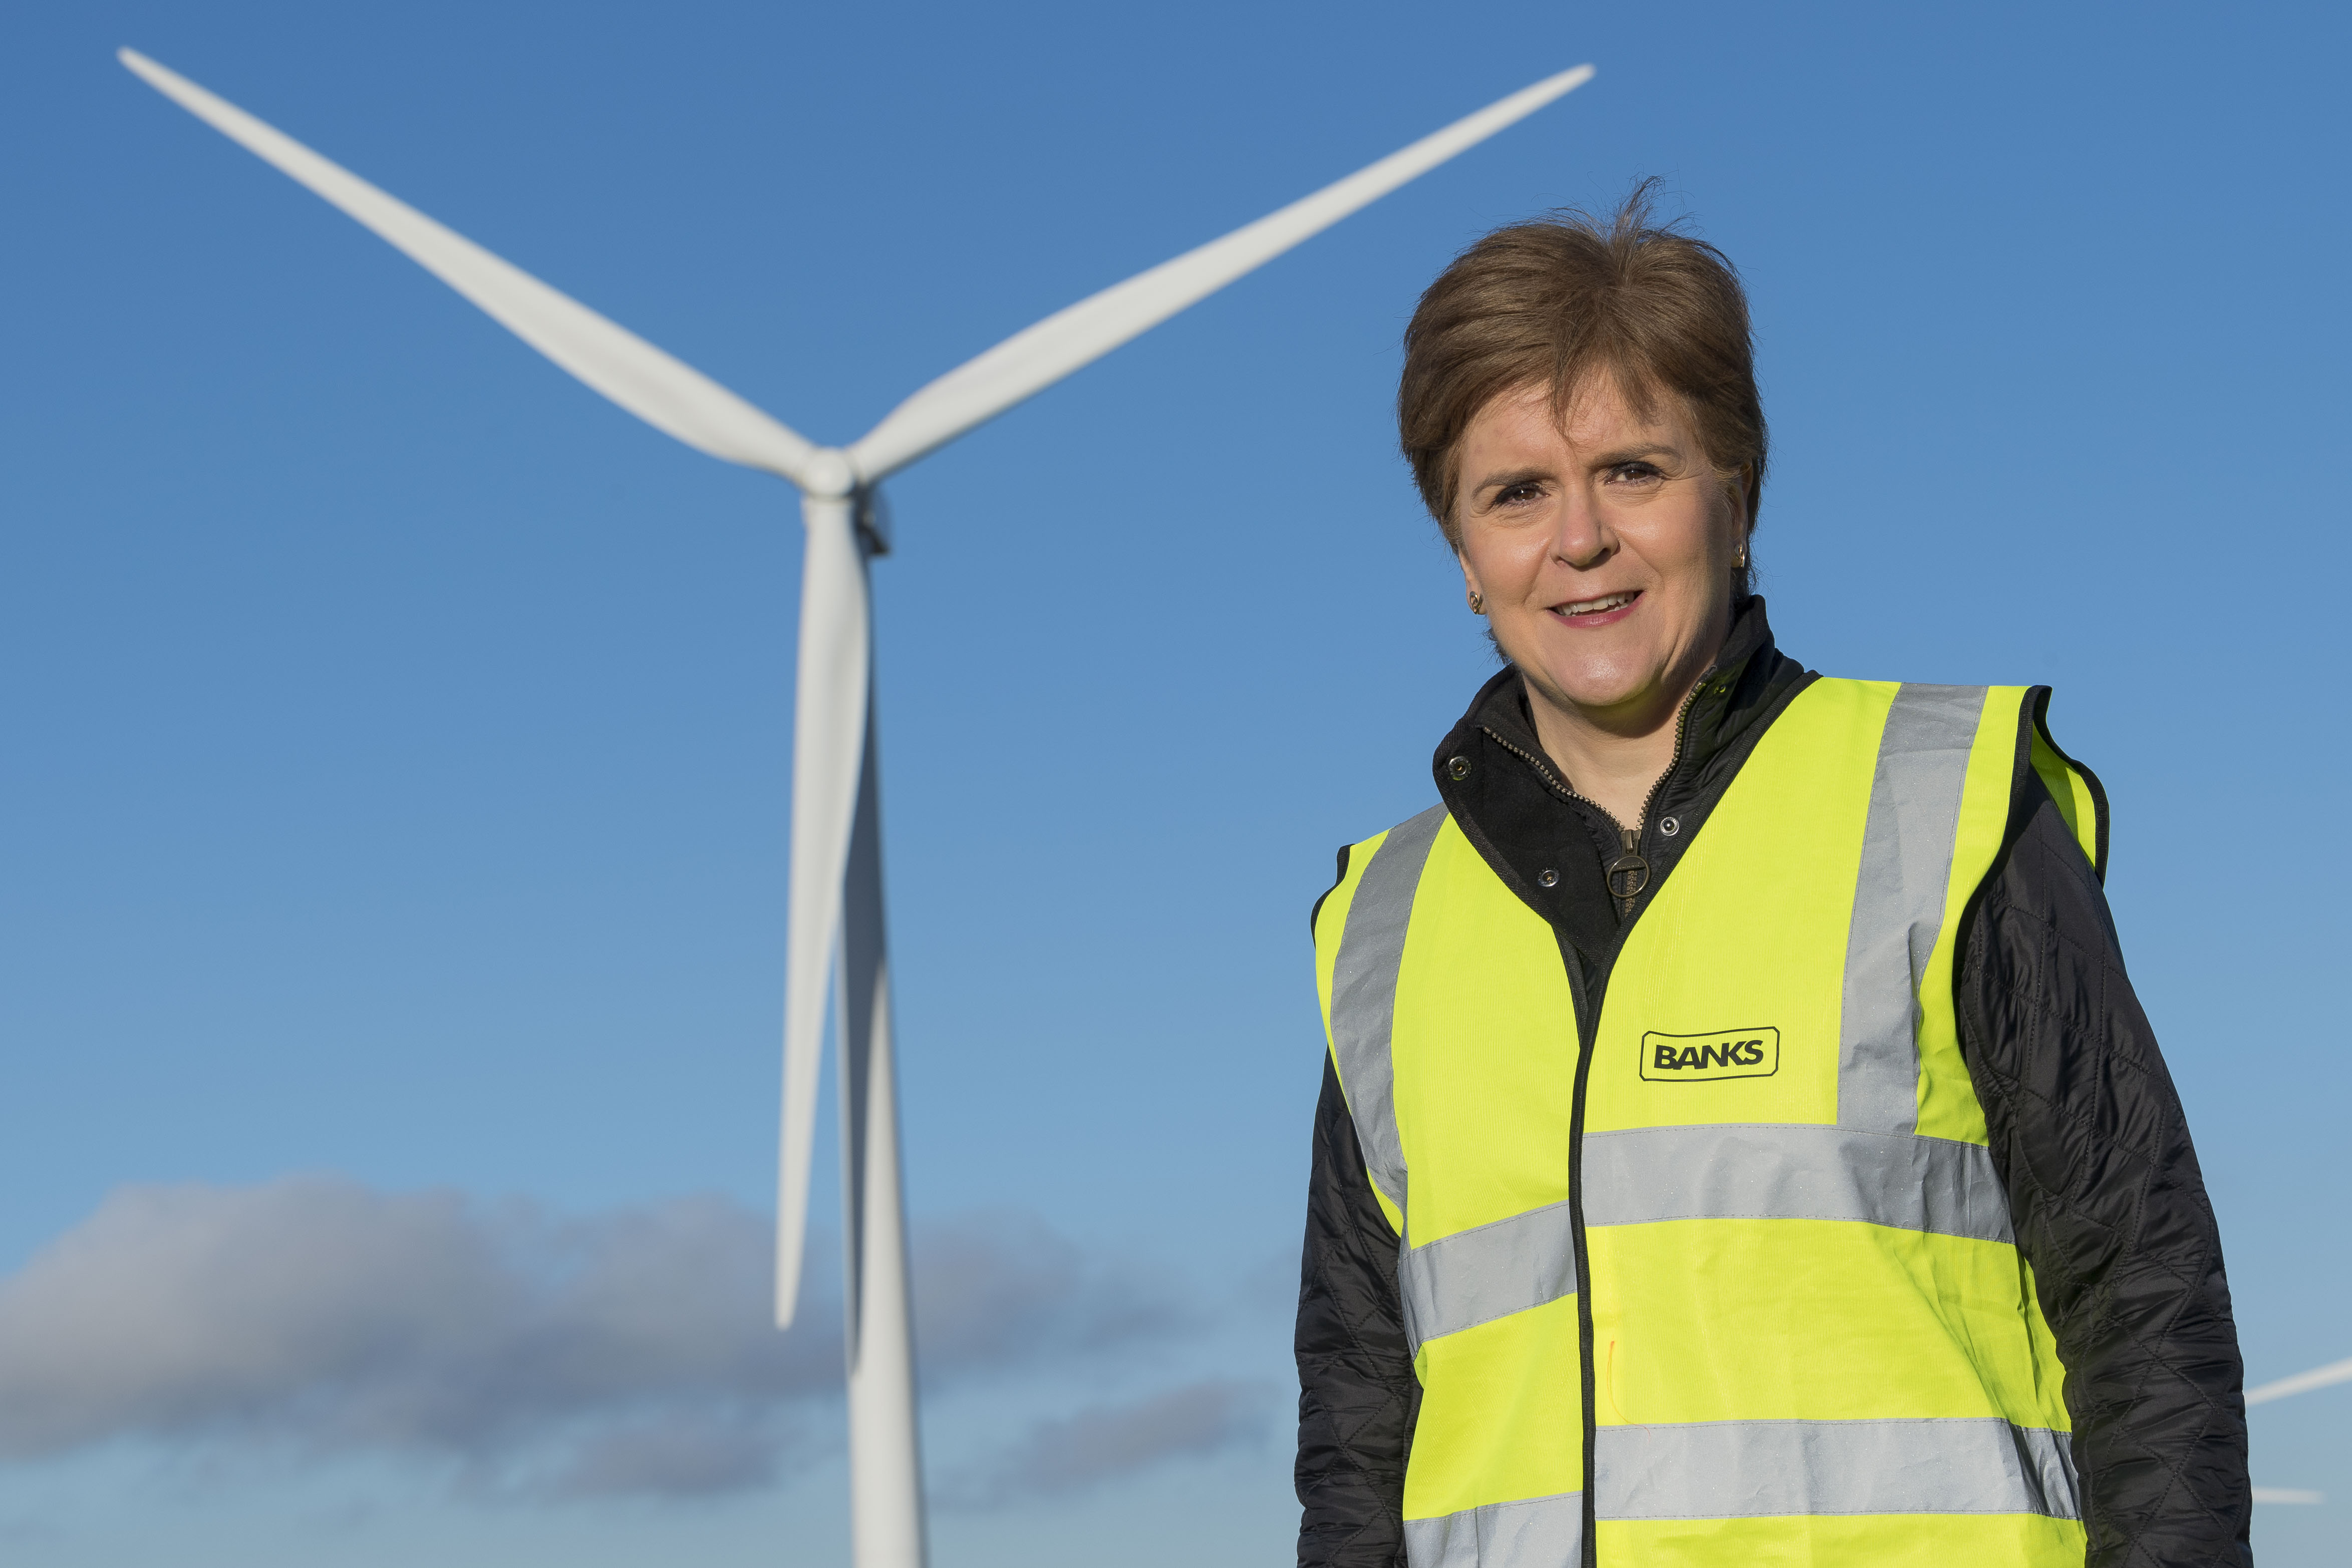 First Minister launches UK's tallest wind turbine